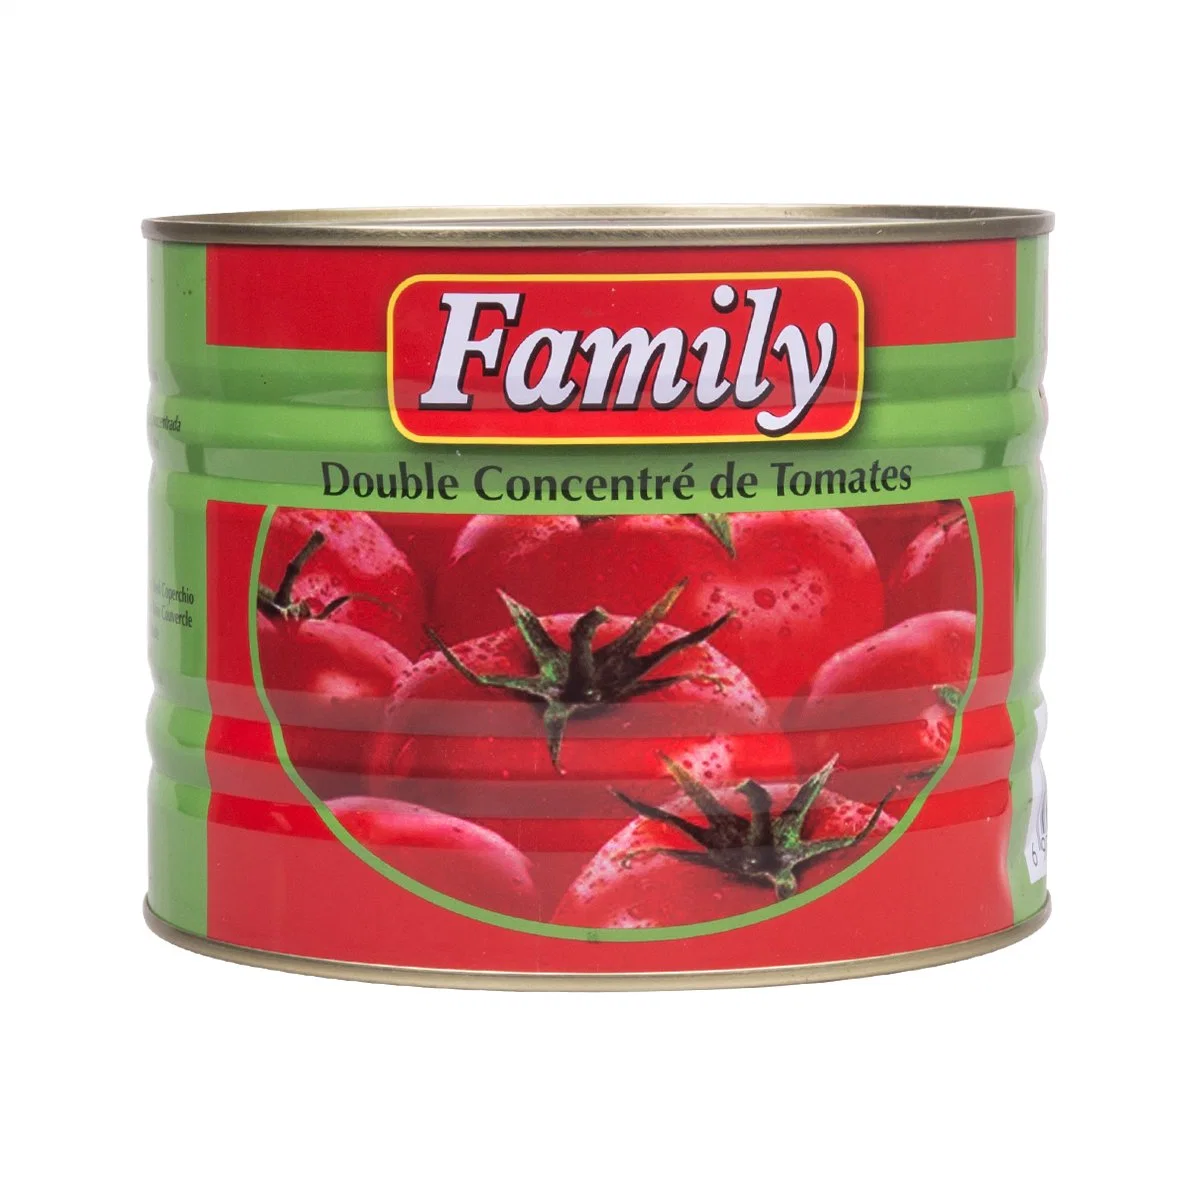 Recommended Product From This Supplier. 28-30% Canned Tomato Paste Five Star Tomato Paste Supplier High Quality